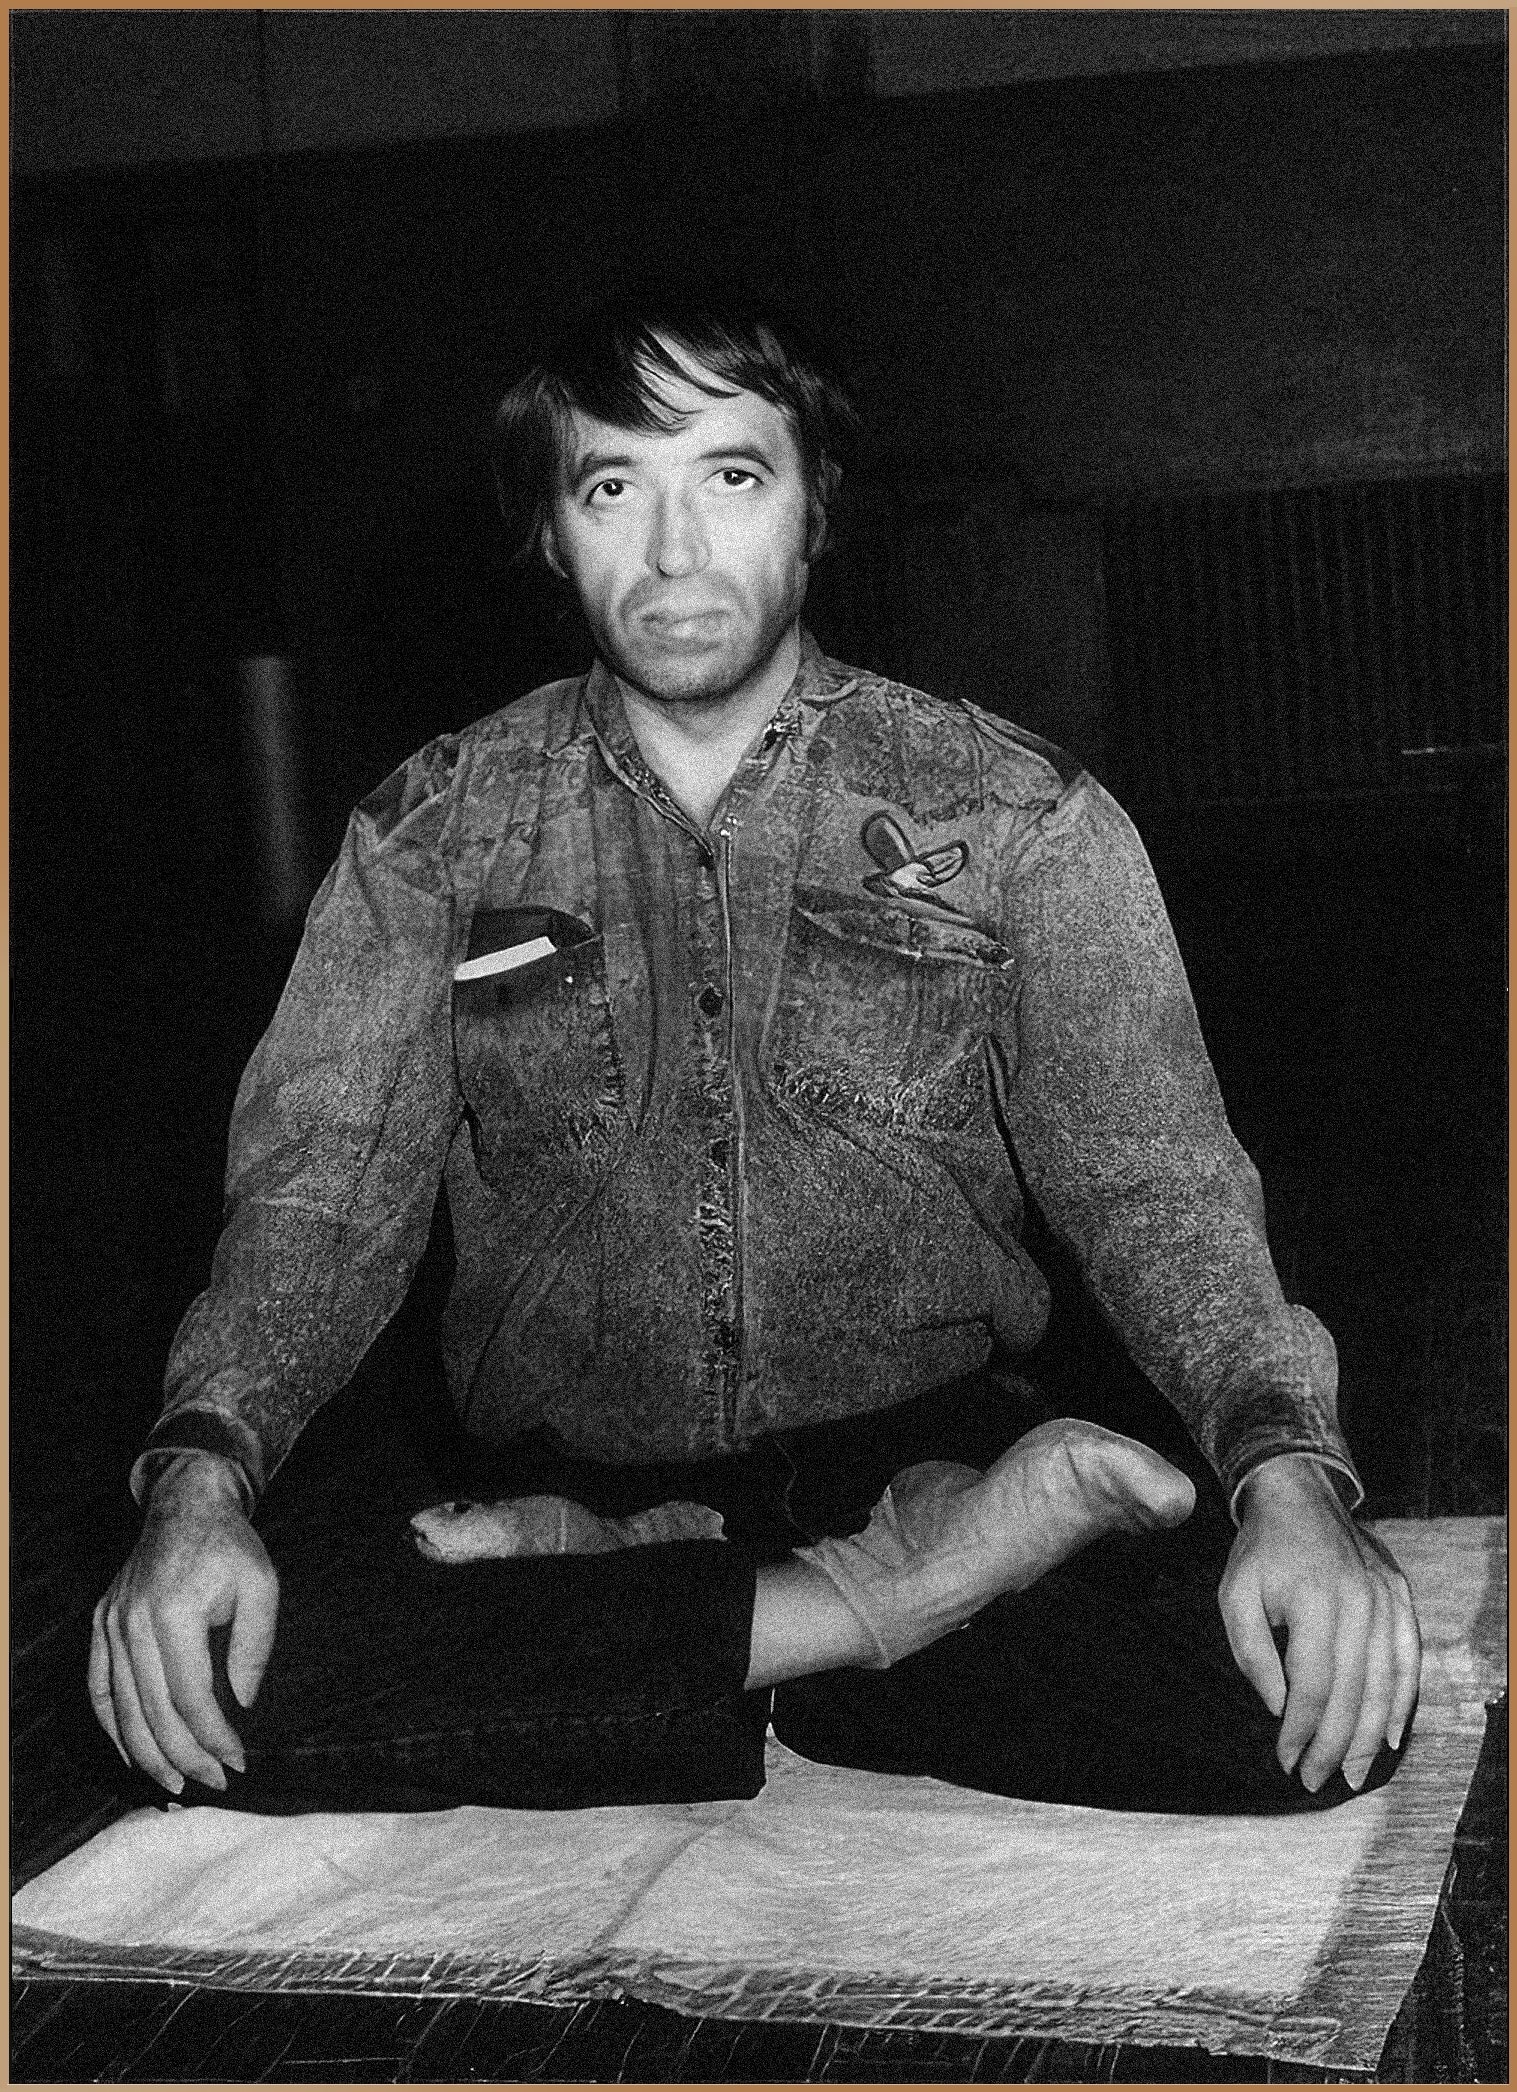 Gregorian Bivolaru seated in a meditative pose, wearing a denim jacket with a space exploration patch, representing his role as the spiritual guide in the MISA network.